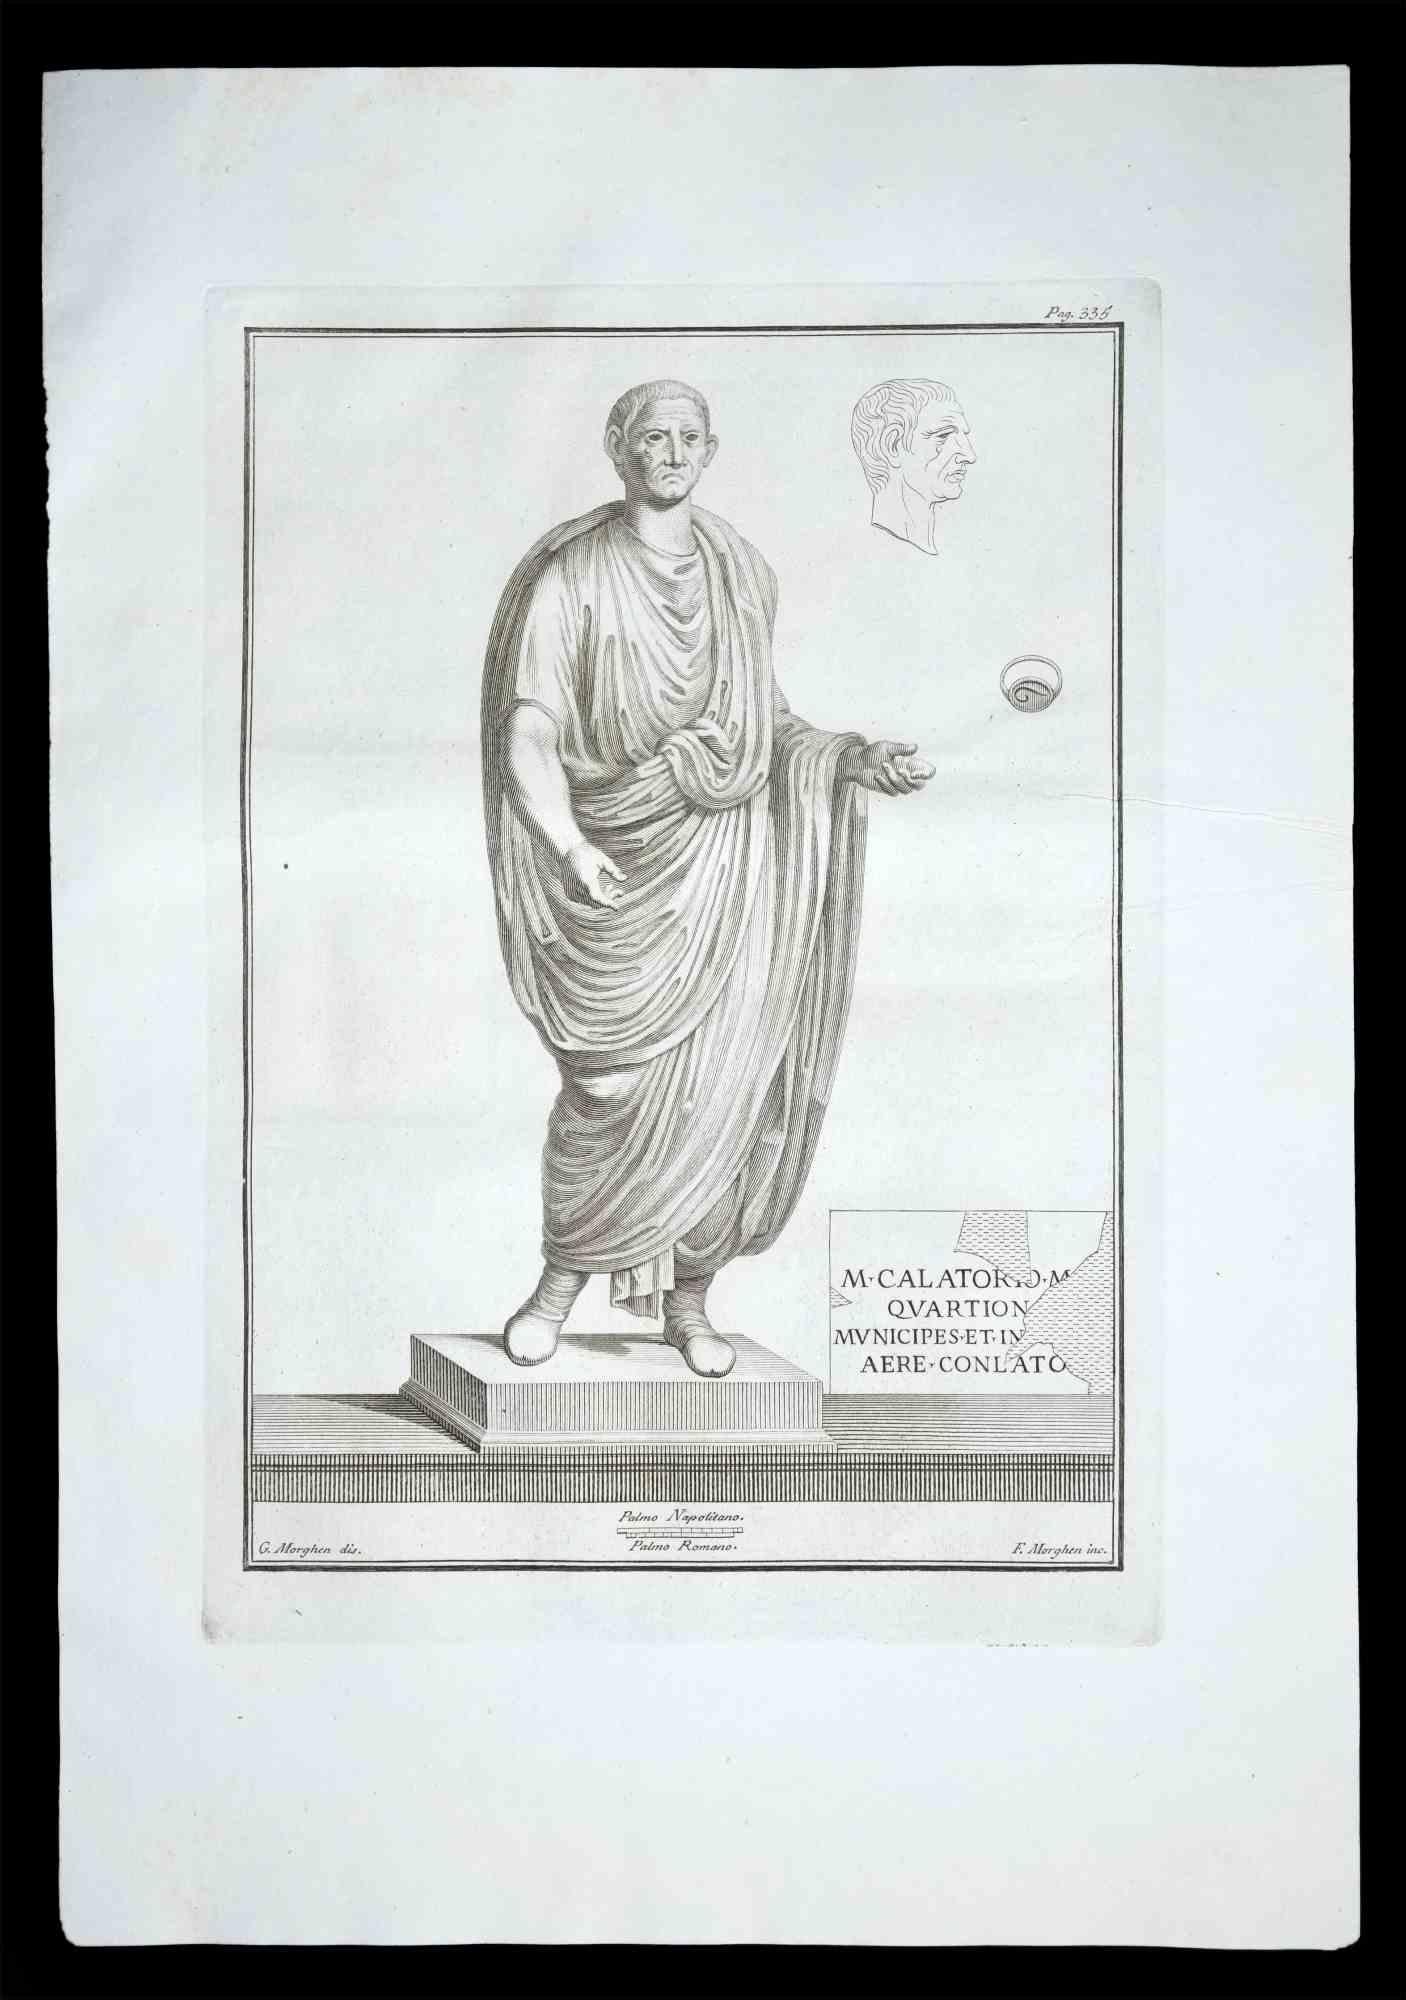 Ancient Roman statue, from the series "Antiquities of Herculaneum", is an original etching on paper realized by Filippo Morghen in the 18th century.

Signed on the plate, on the lower right.

Good conditions.

The etching belongs to the print suite